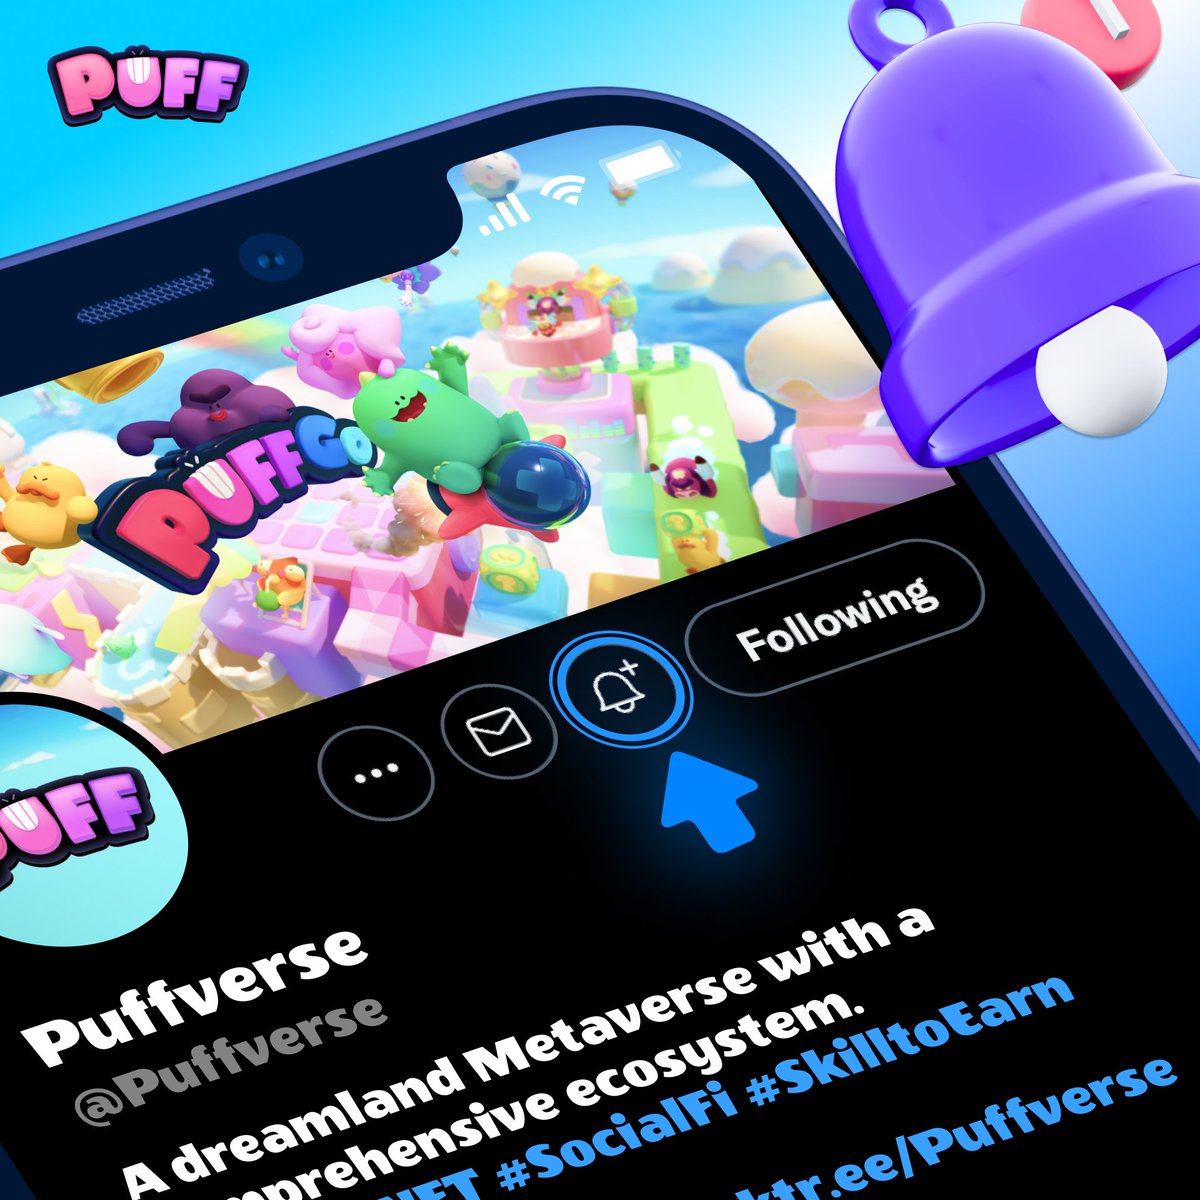 Be the Puff who’s always the Early Bird for all events in the #Puffverse & insider who gets first hand information at all time 🥳 🔔 Turn your notification on for freshest #Puff news 🔊 Always stay close to get all benefits early to enjoy more privileges Be master Puffs! 🙌🏻